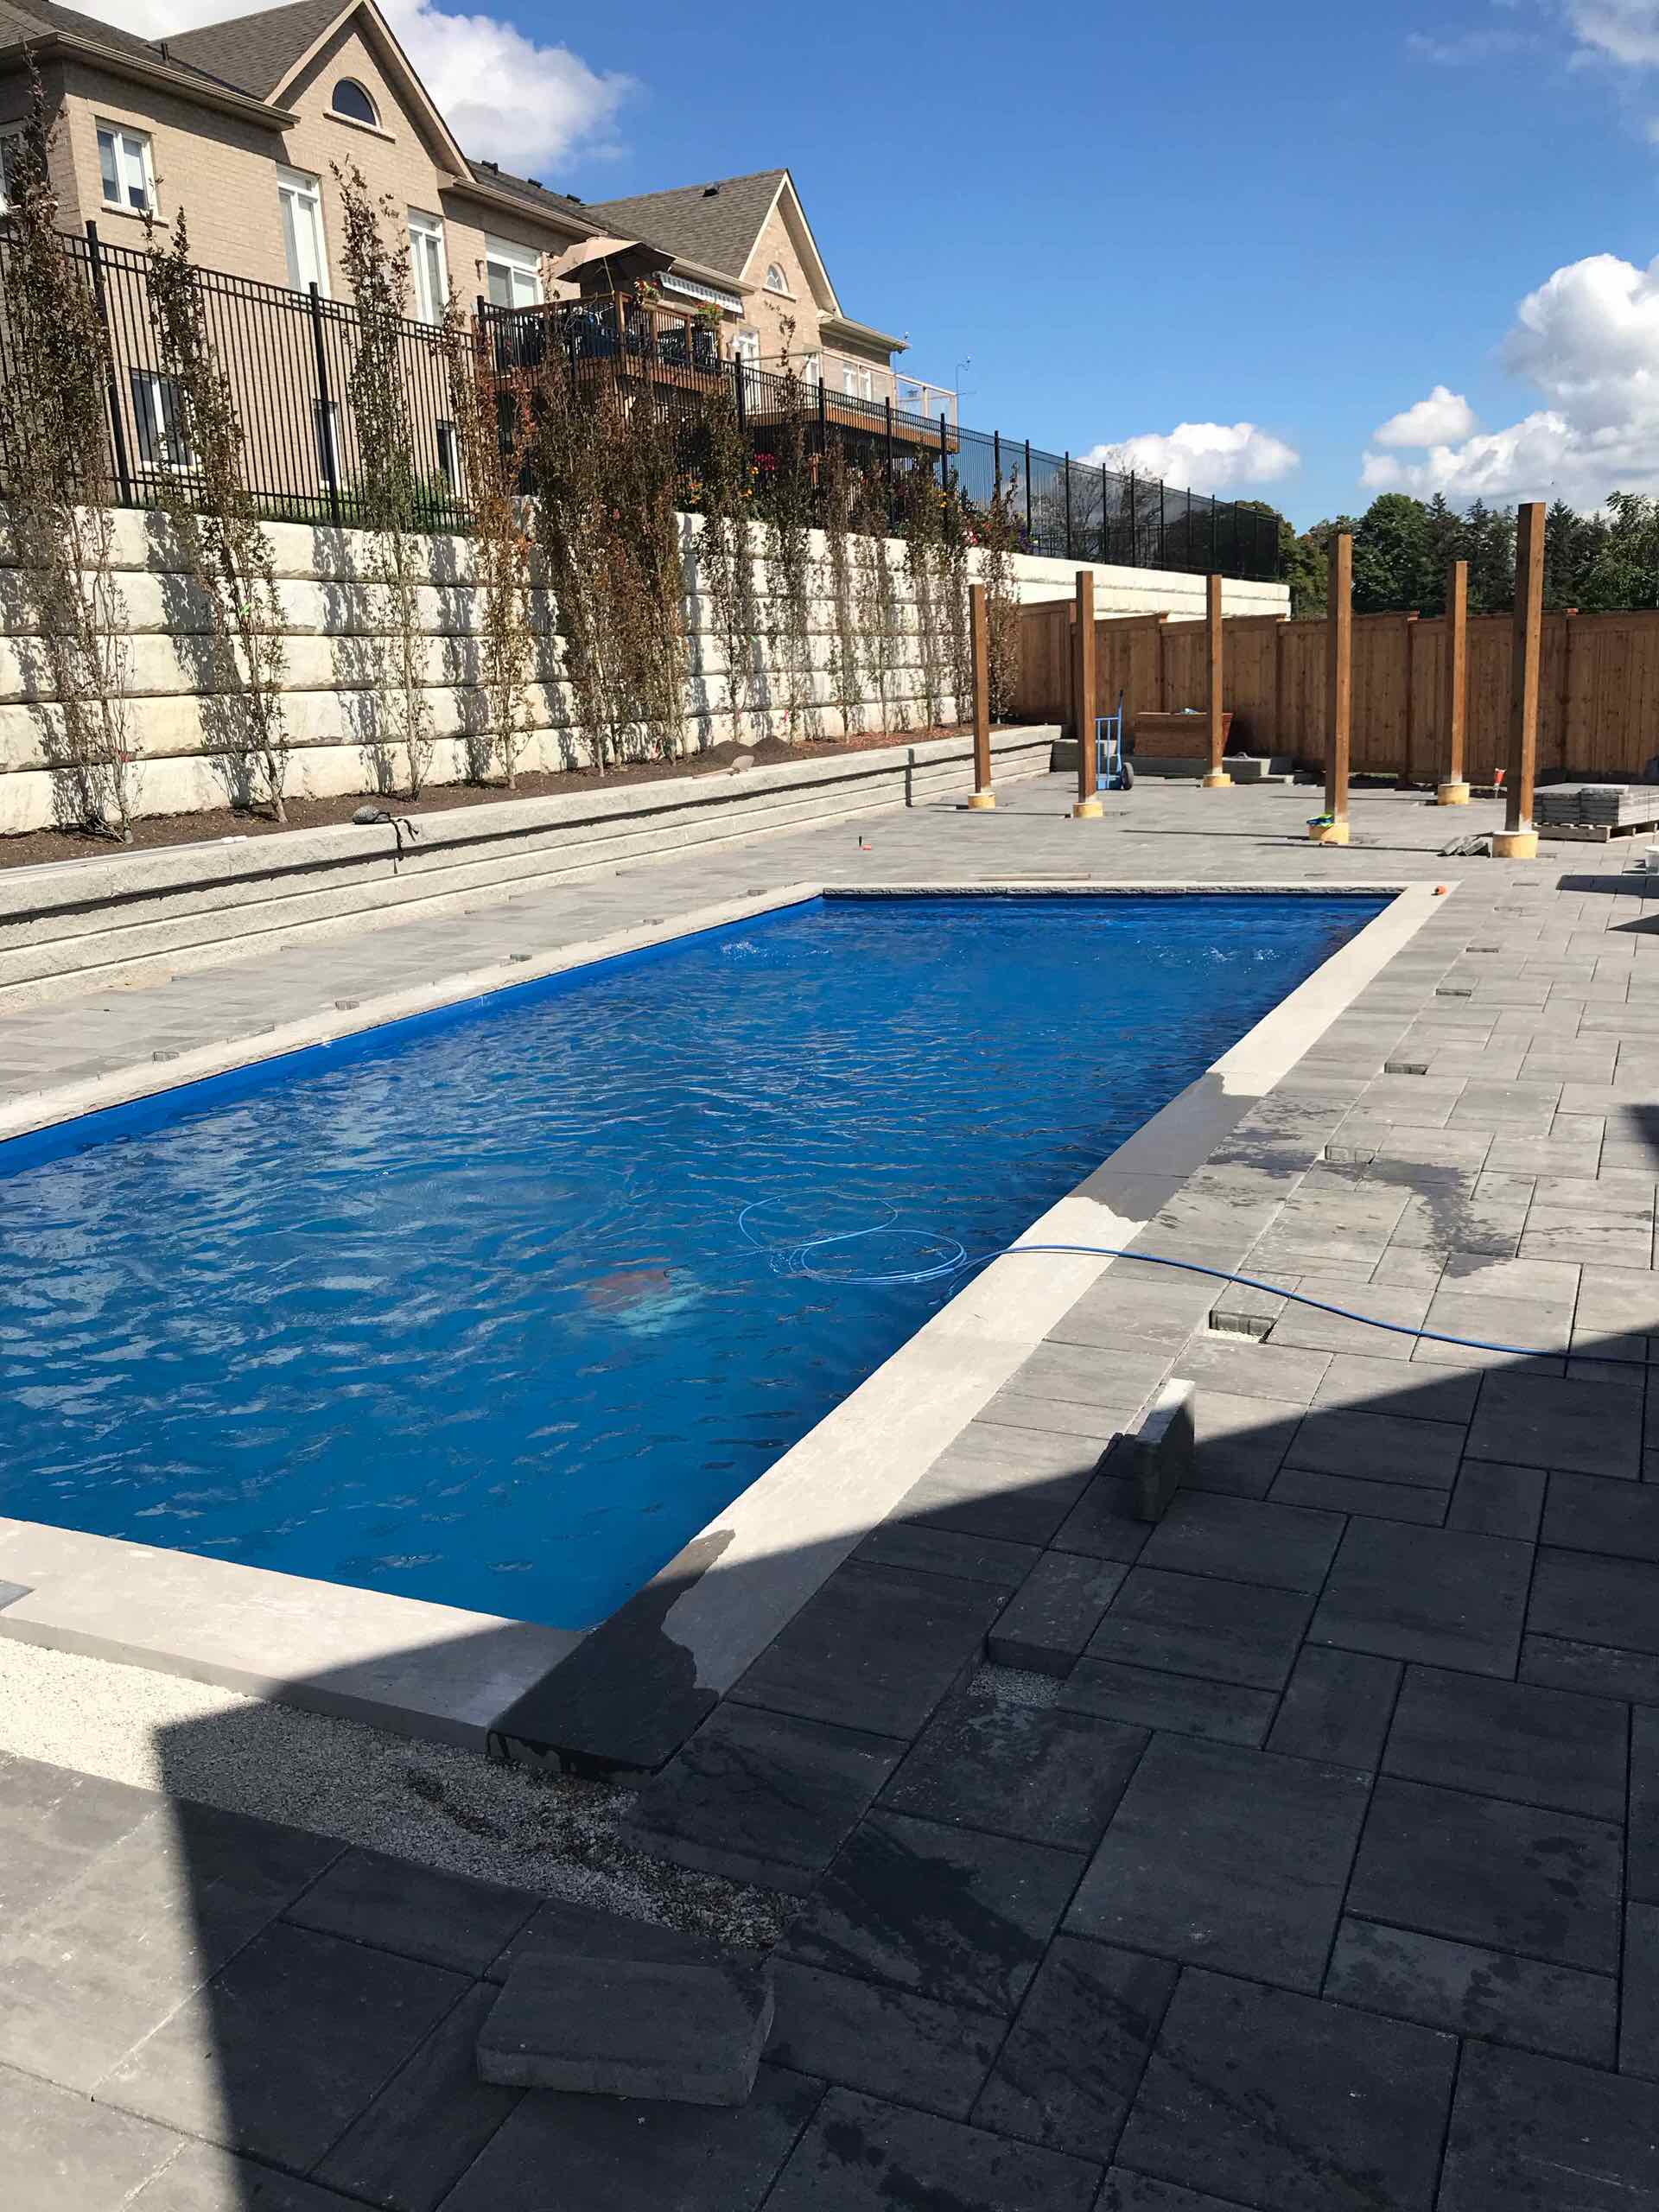 Bradford Family Oasis Pool Project